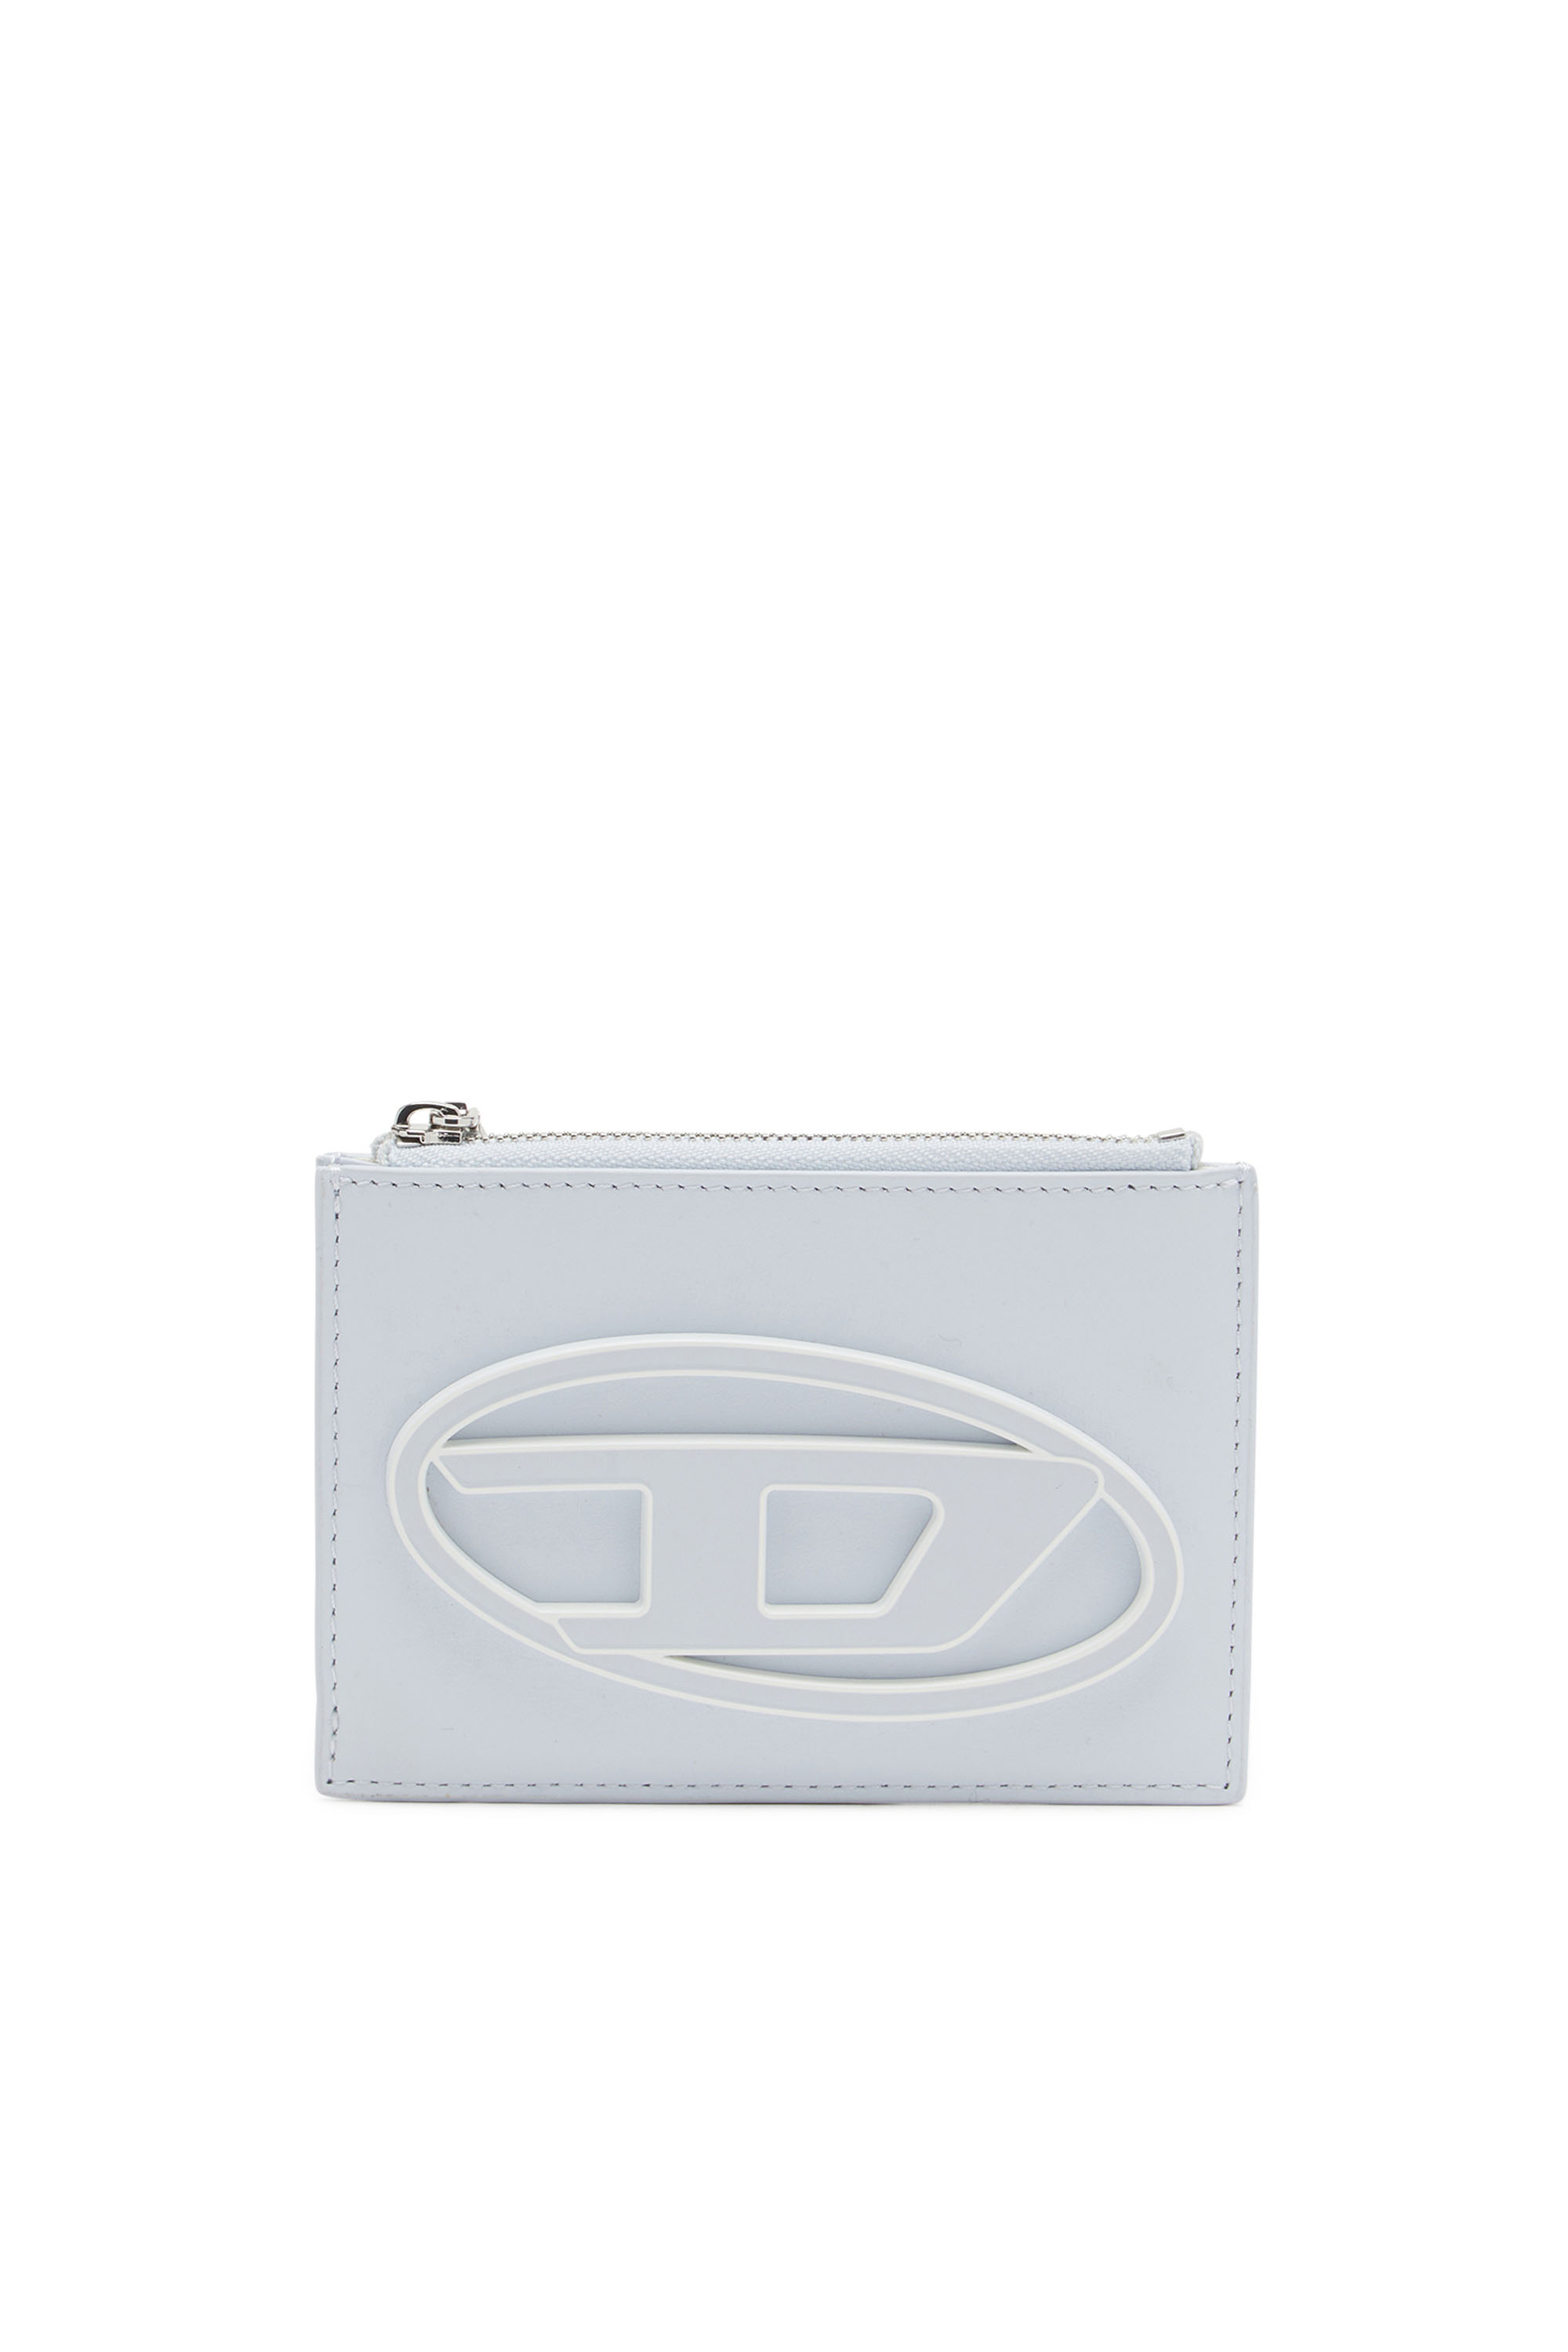 Women's Wallets and Card Holders: Leather, Denim | Diesel®